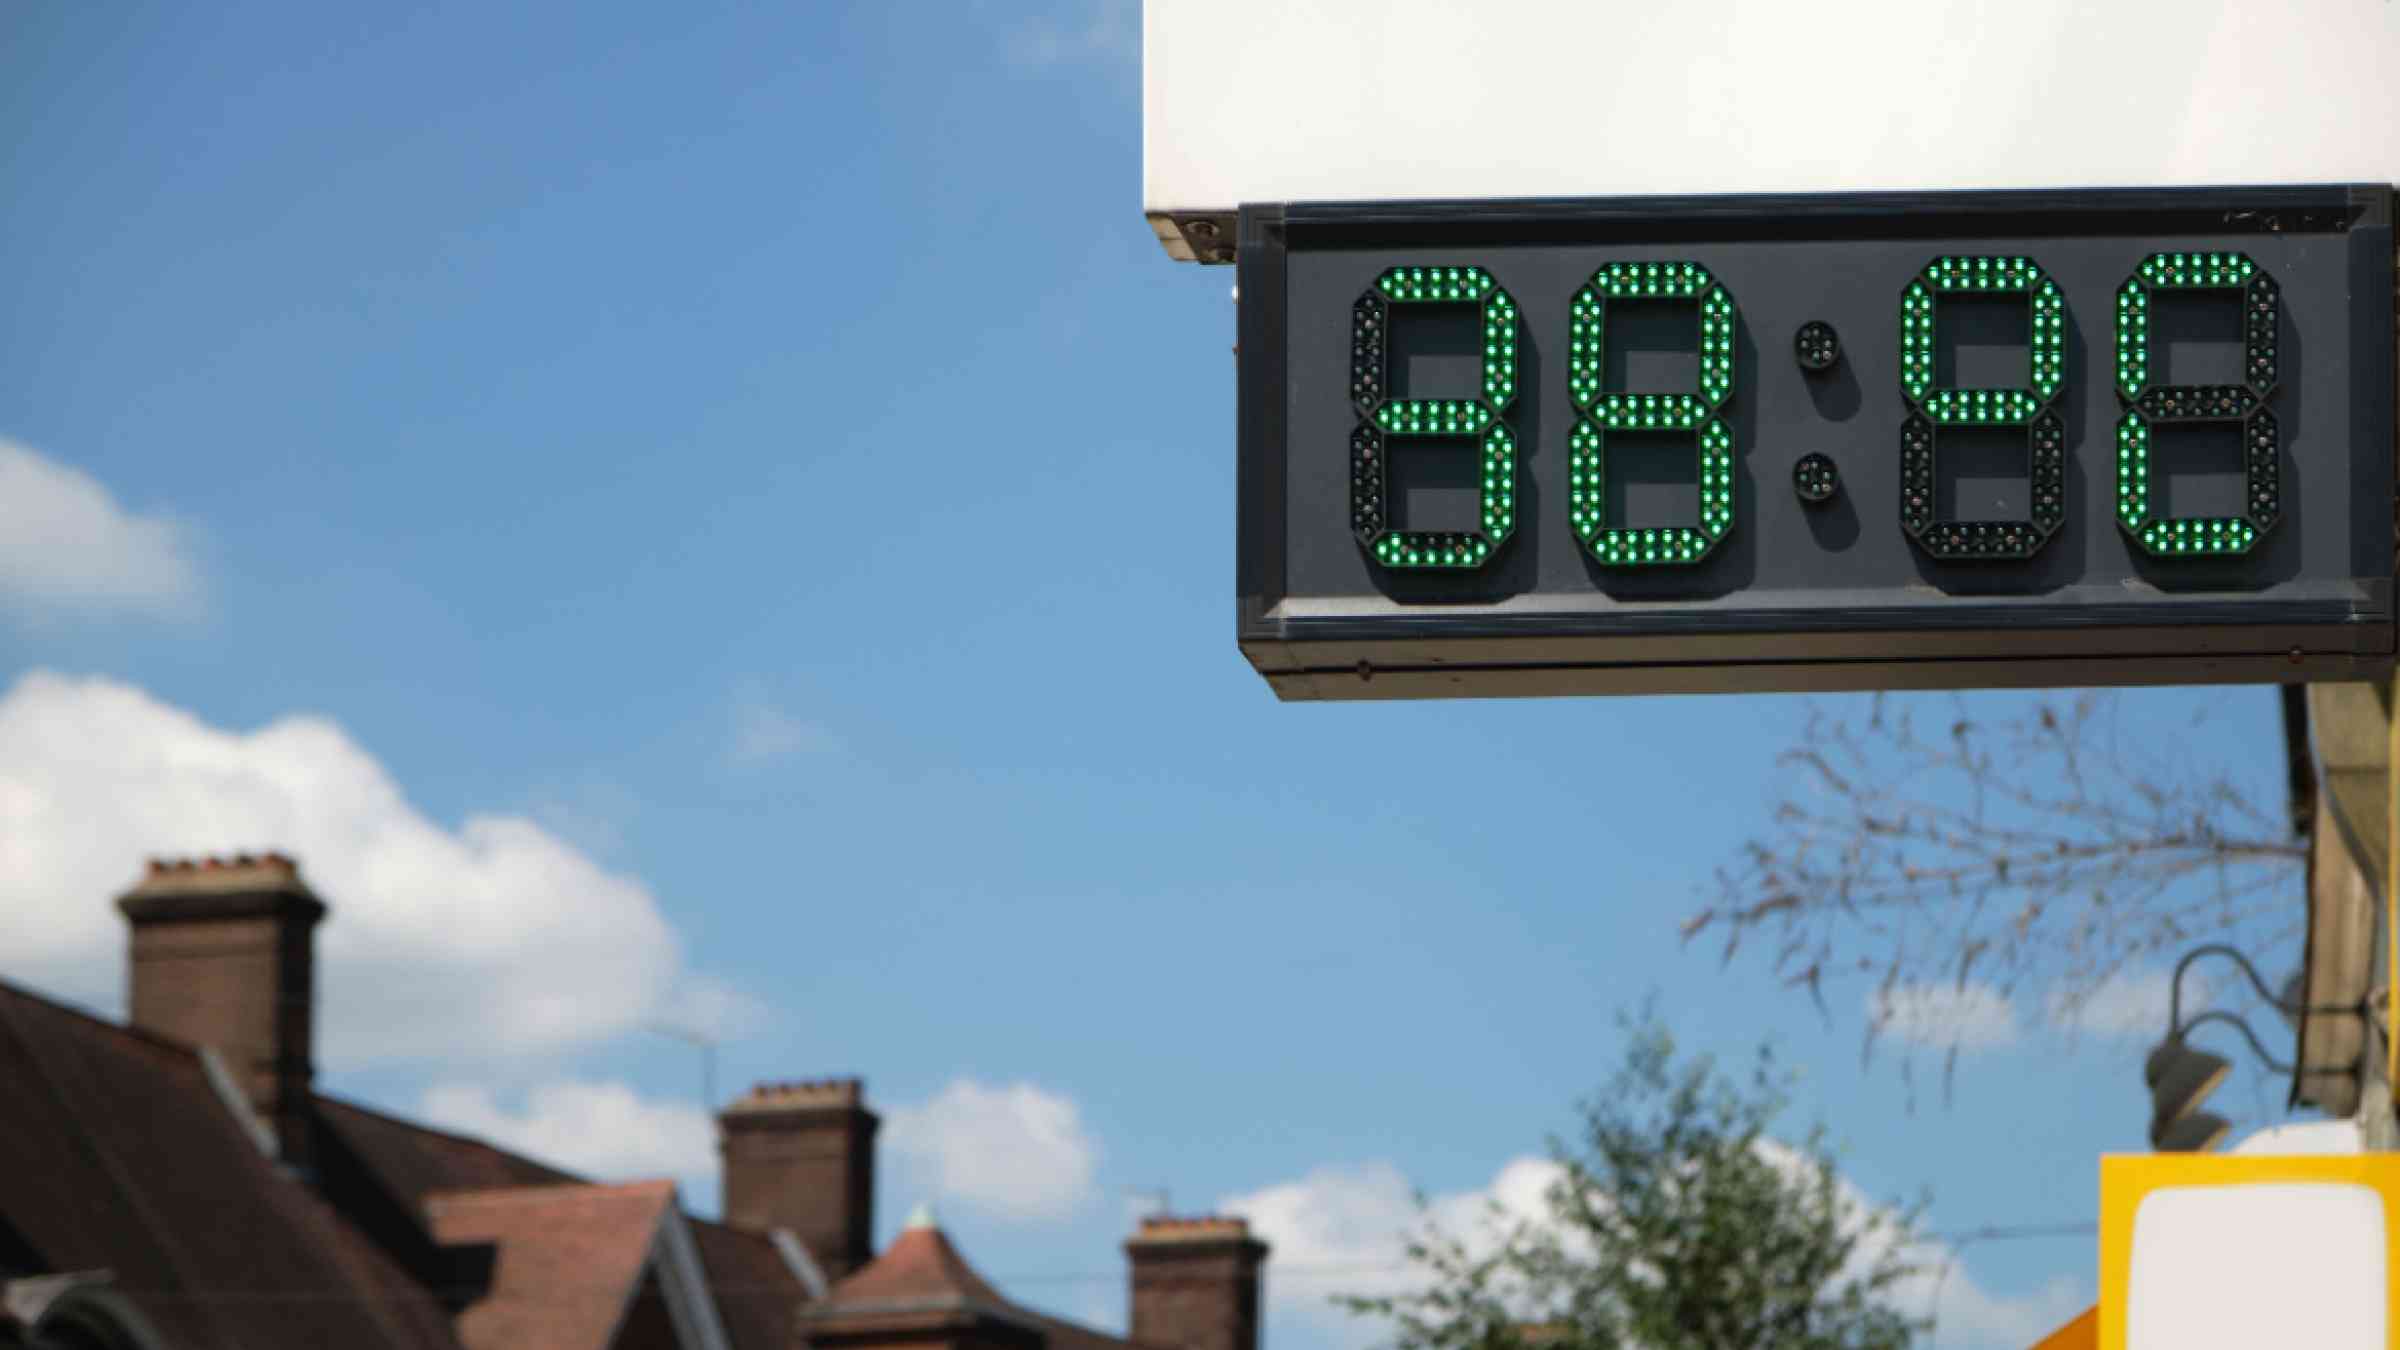 Digital thermometer showing a high temperature in a town